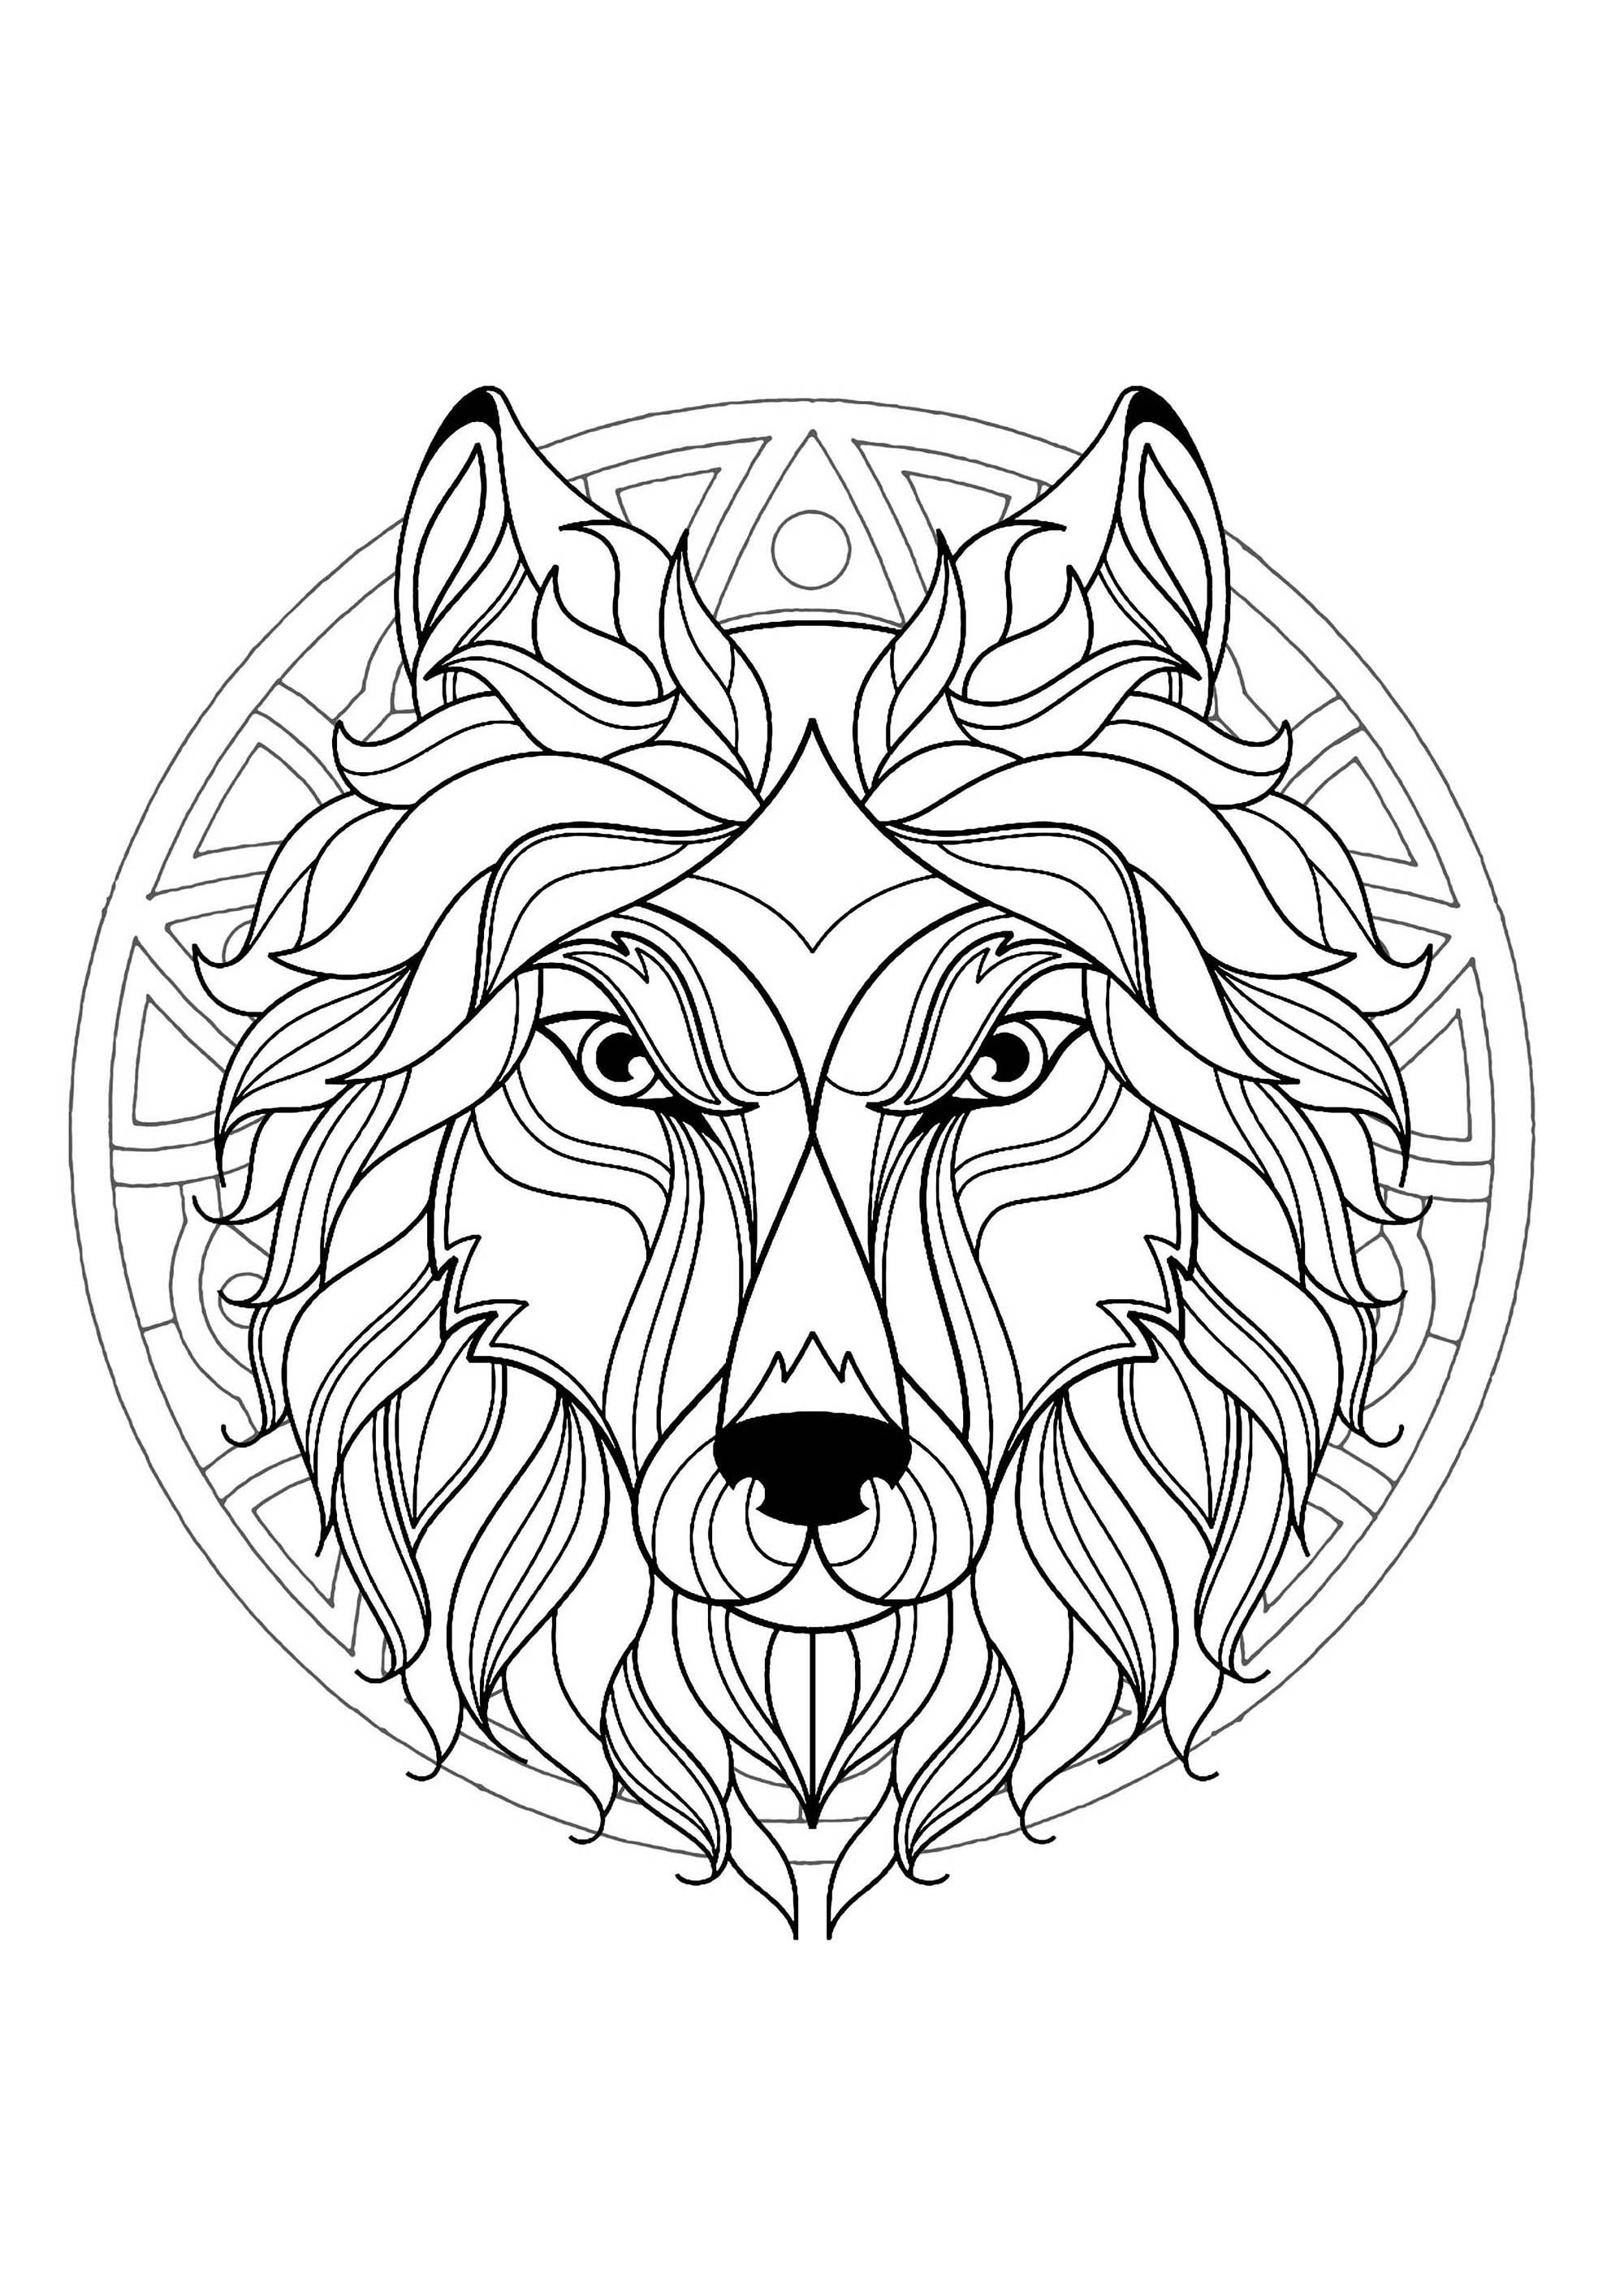 This wolf is ready to be colored in this incredible Mandala, you can print it and let your creativity guide you.